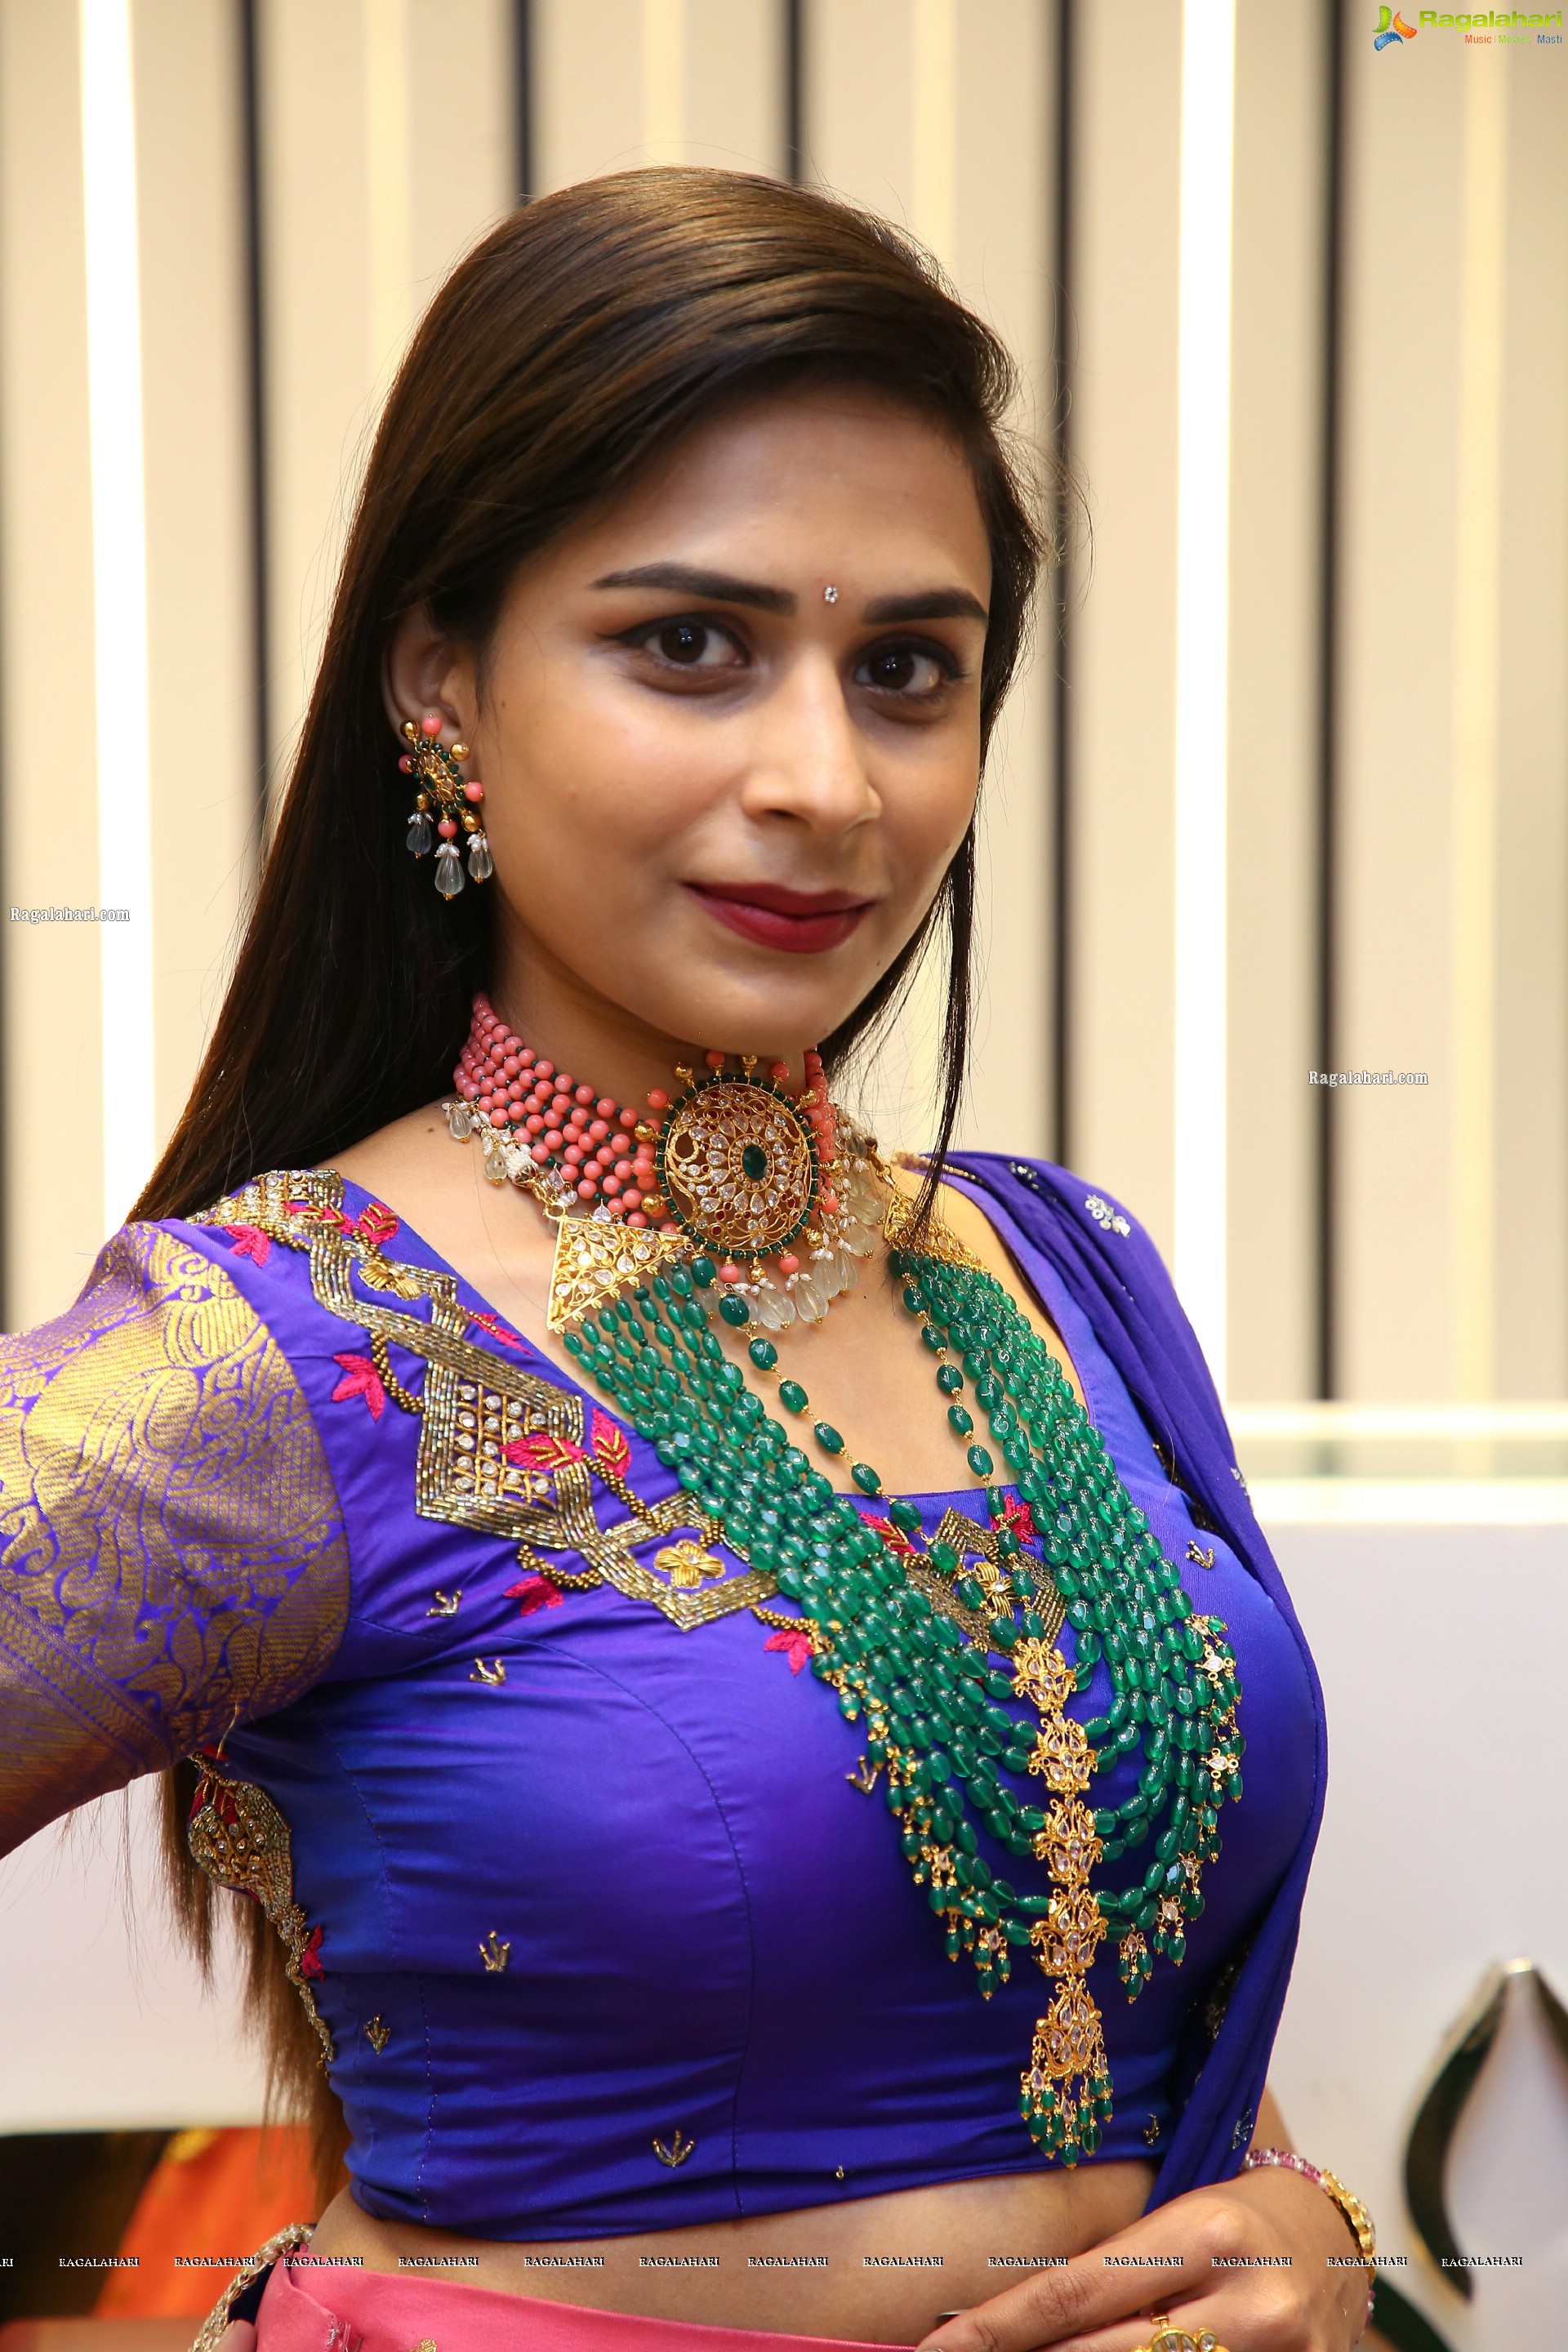 Mounica in Traditional Pink and Blue Lehenga and Jewellery, HD Photo Gallery